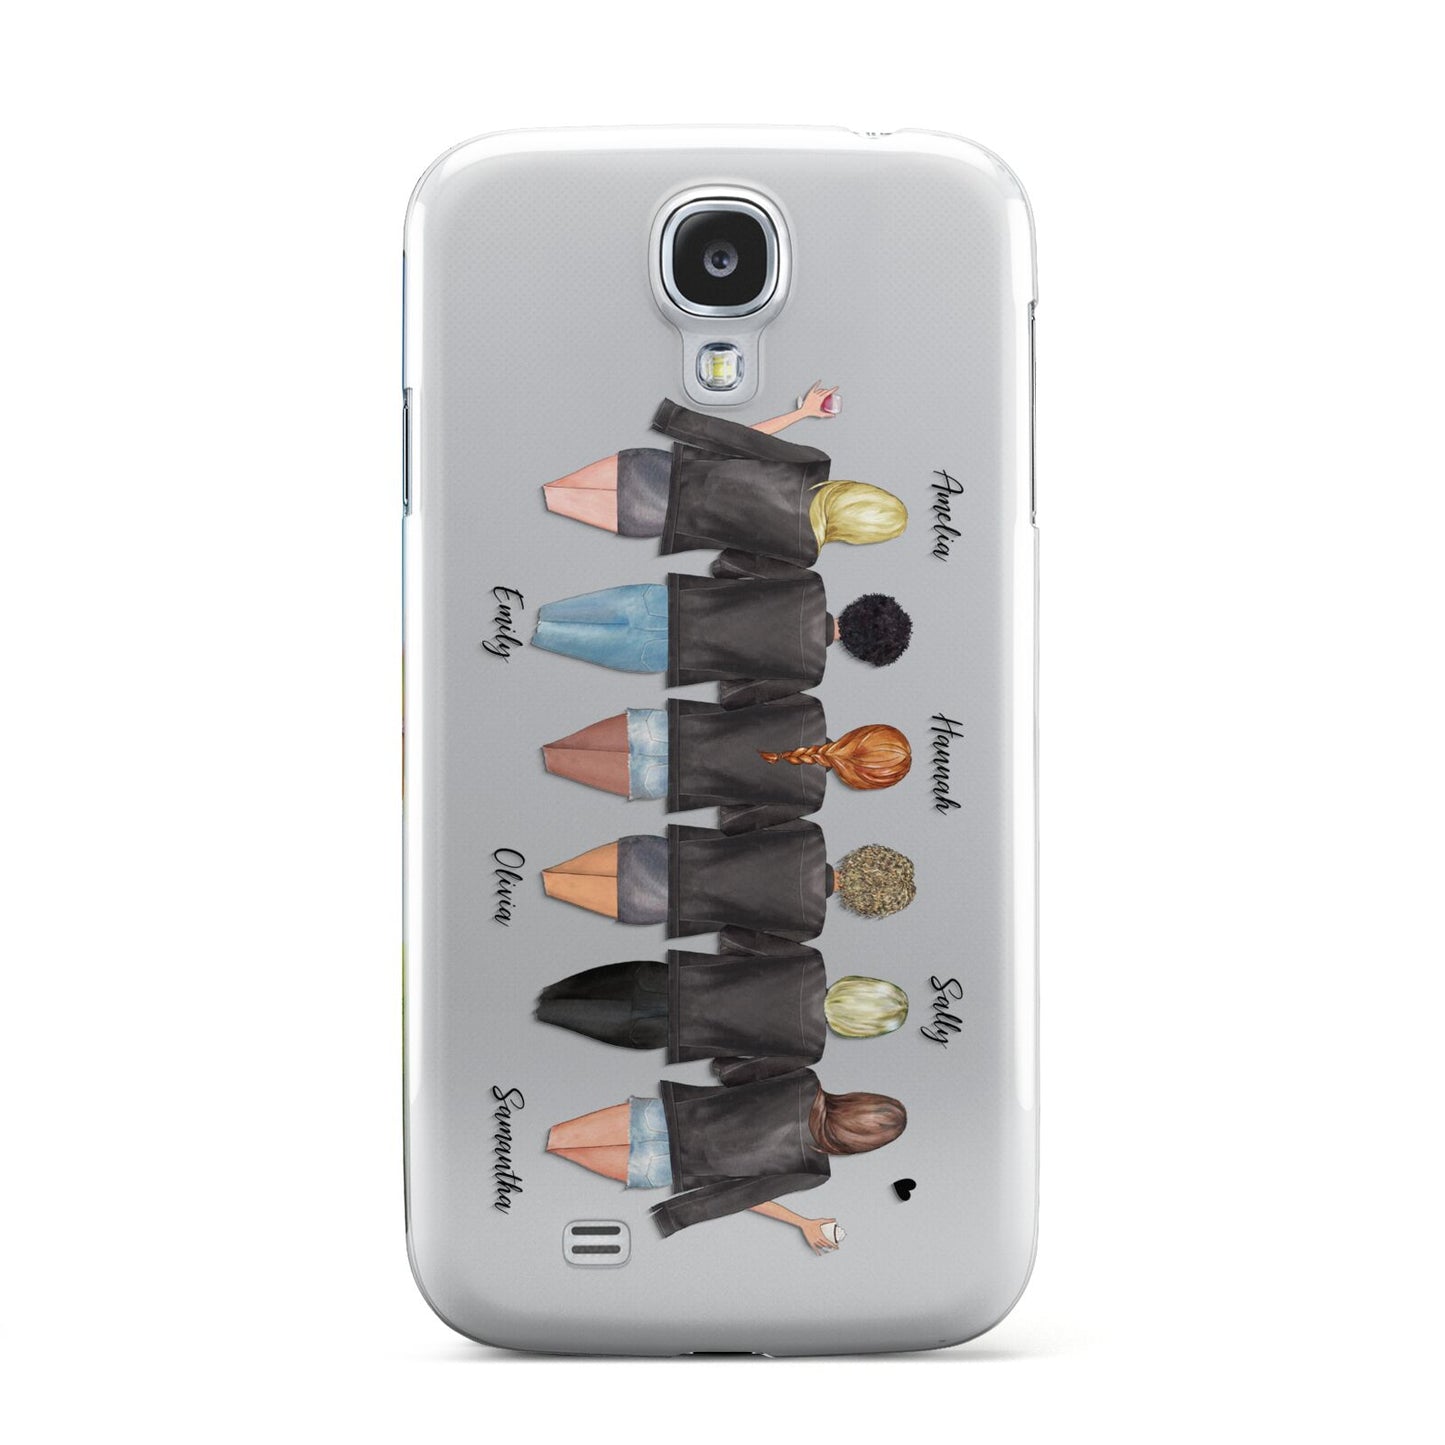 6 Best Friends with Names Samsung Galaxy S4 Case